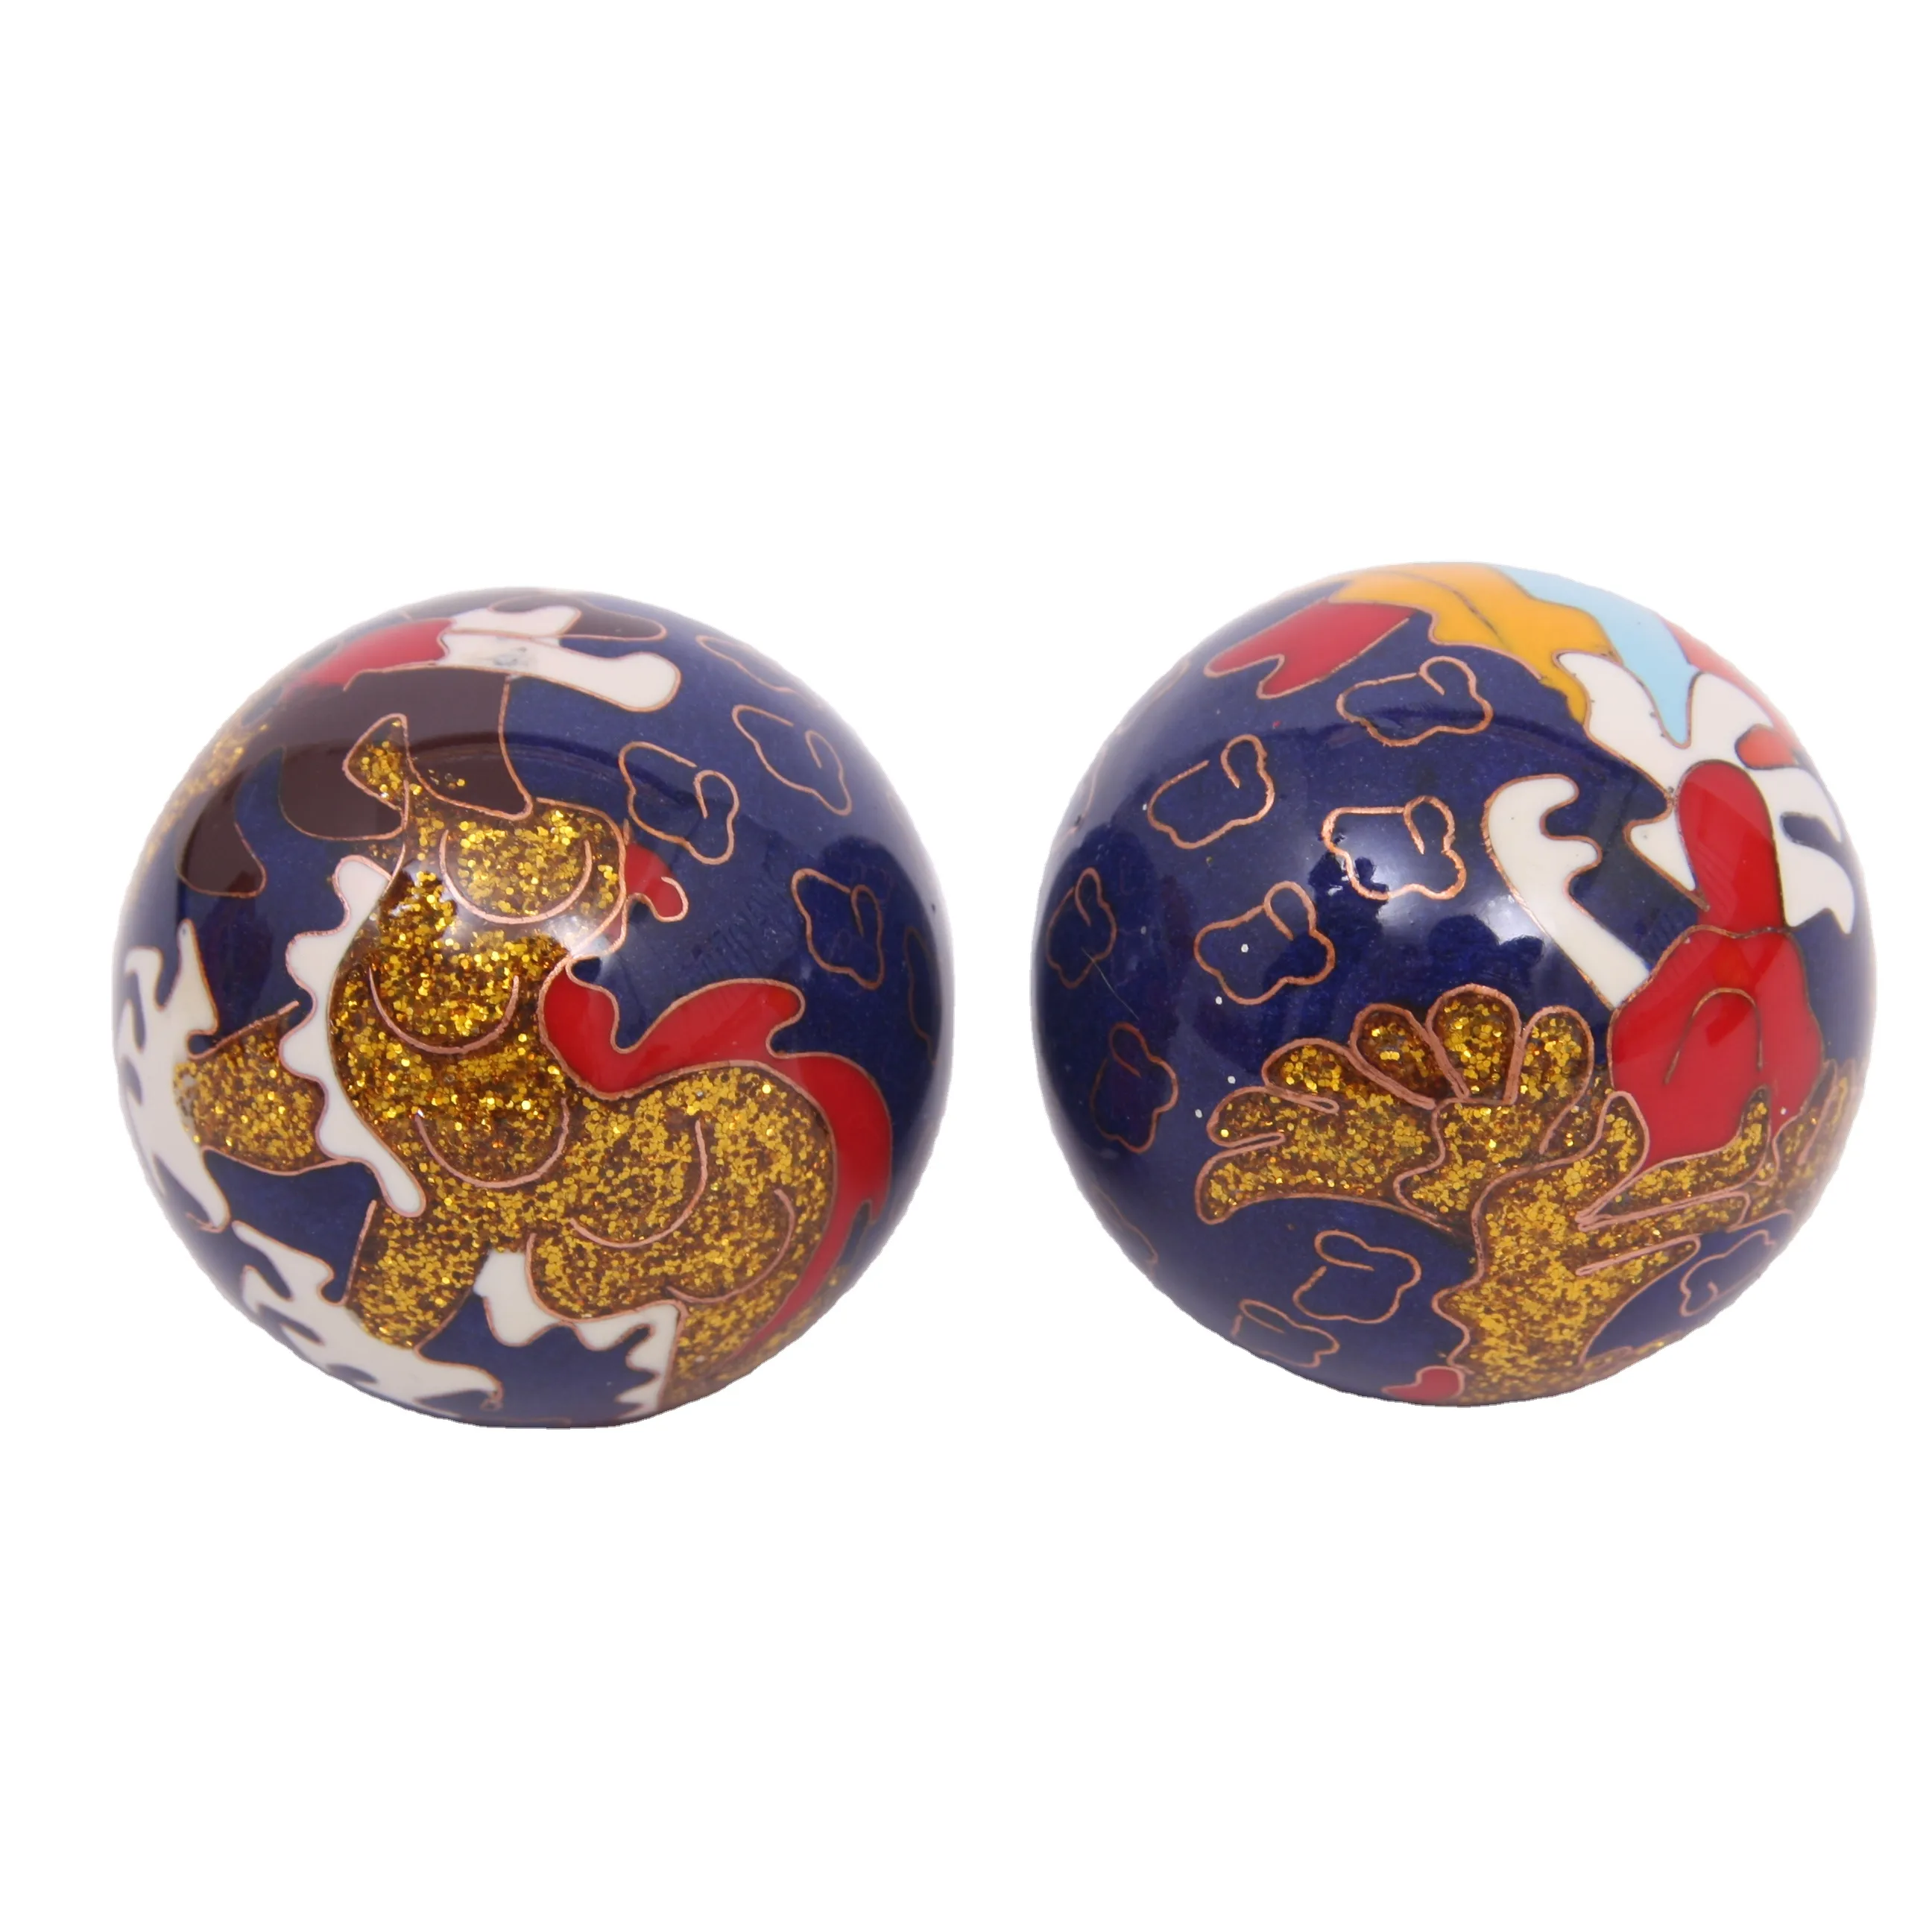 Large Solid Stainless Steel Baoding Balls Steel Ball